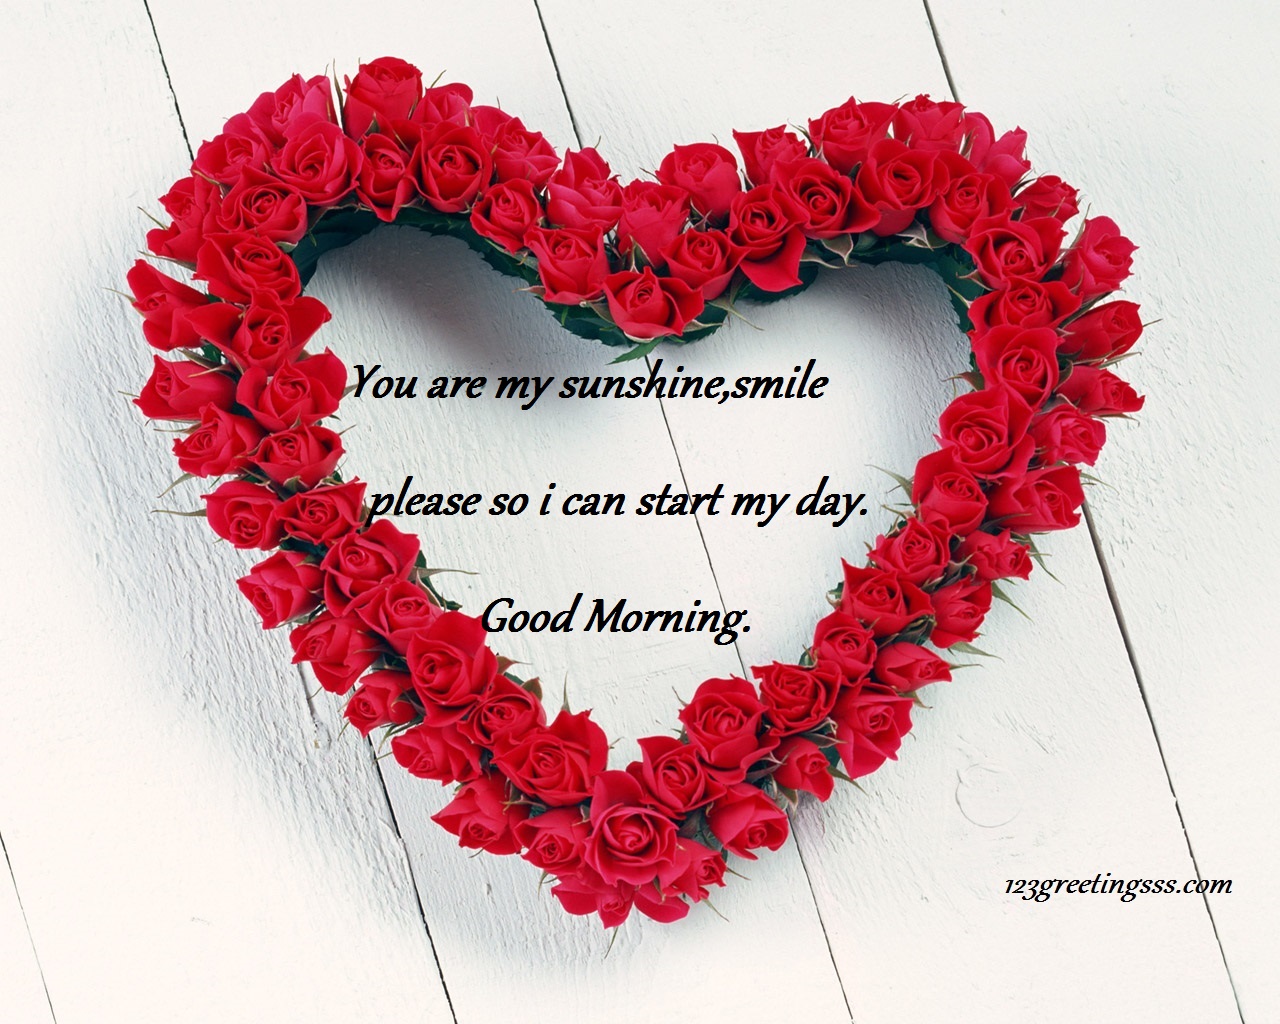 I Can Start My Day - Good Morning From Heart , HD Wallpaper & Backgrounds